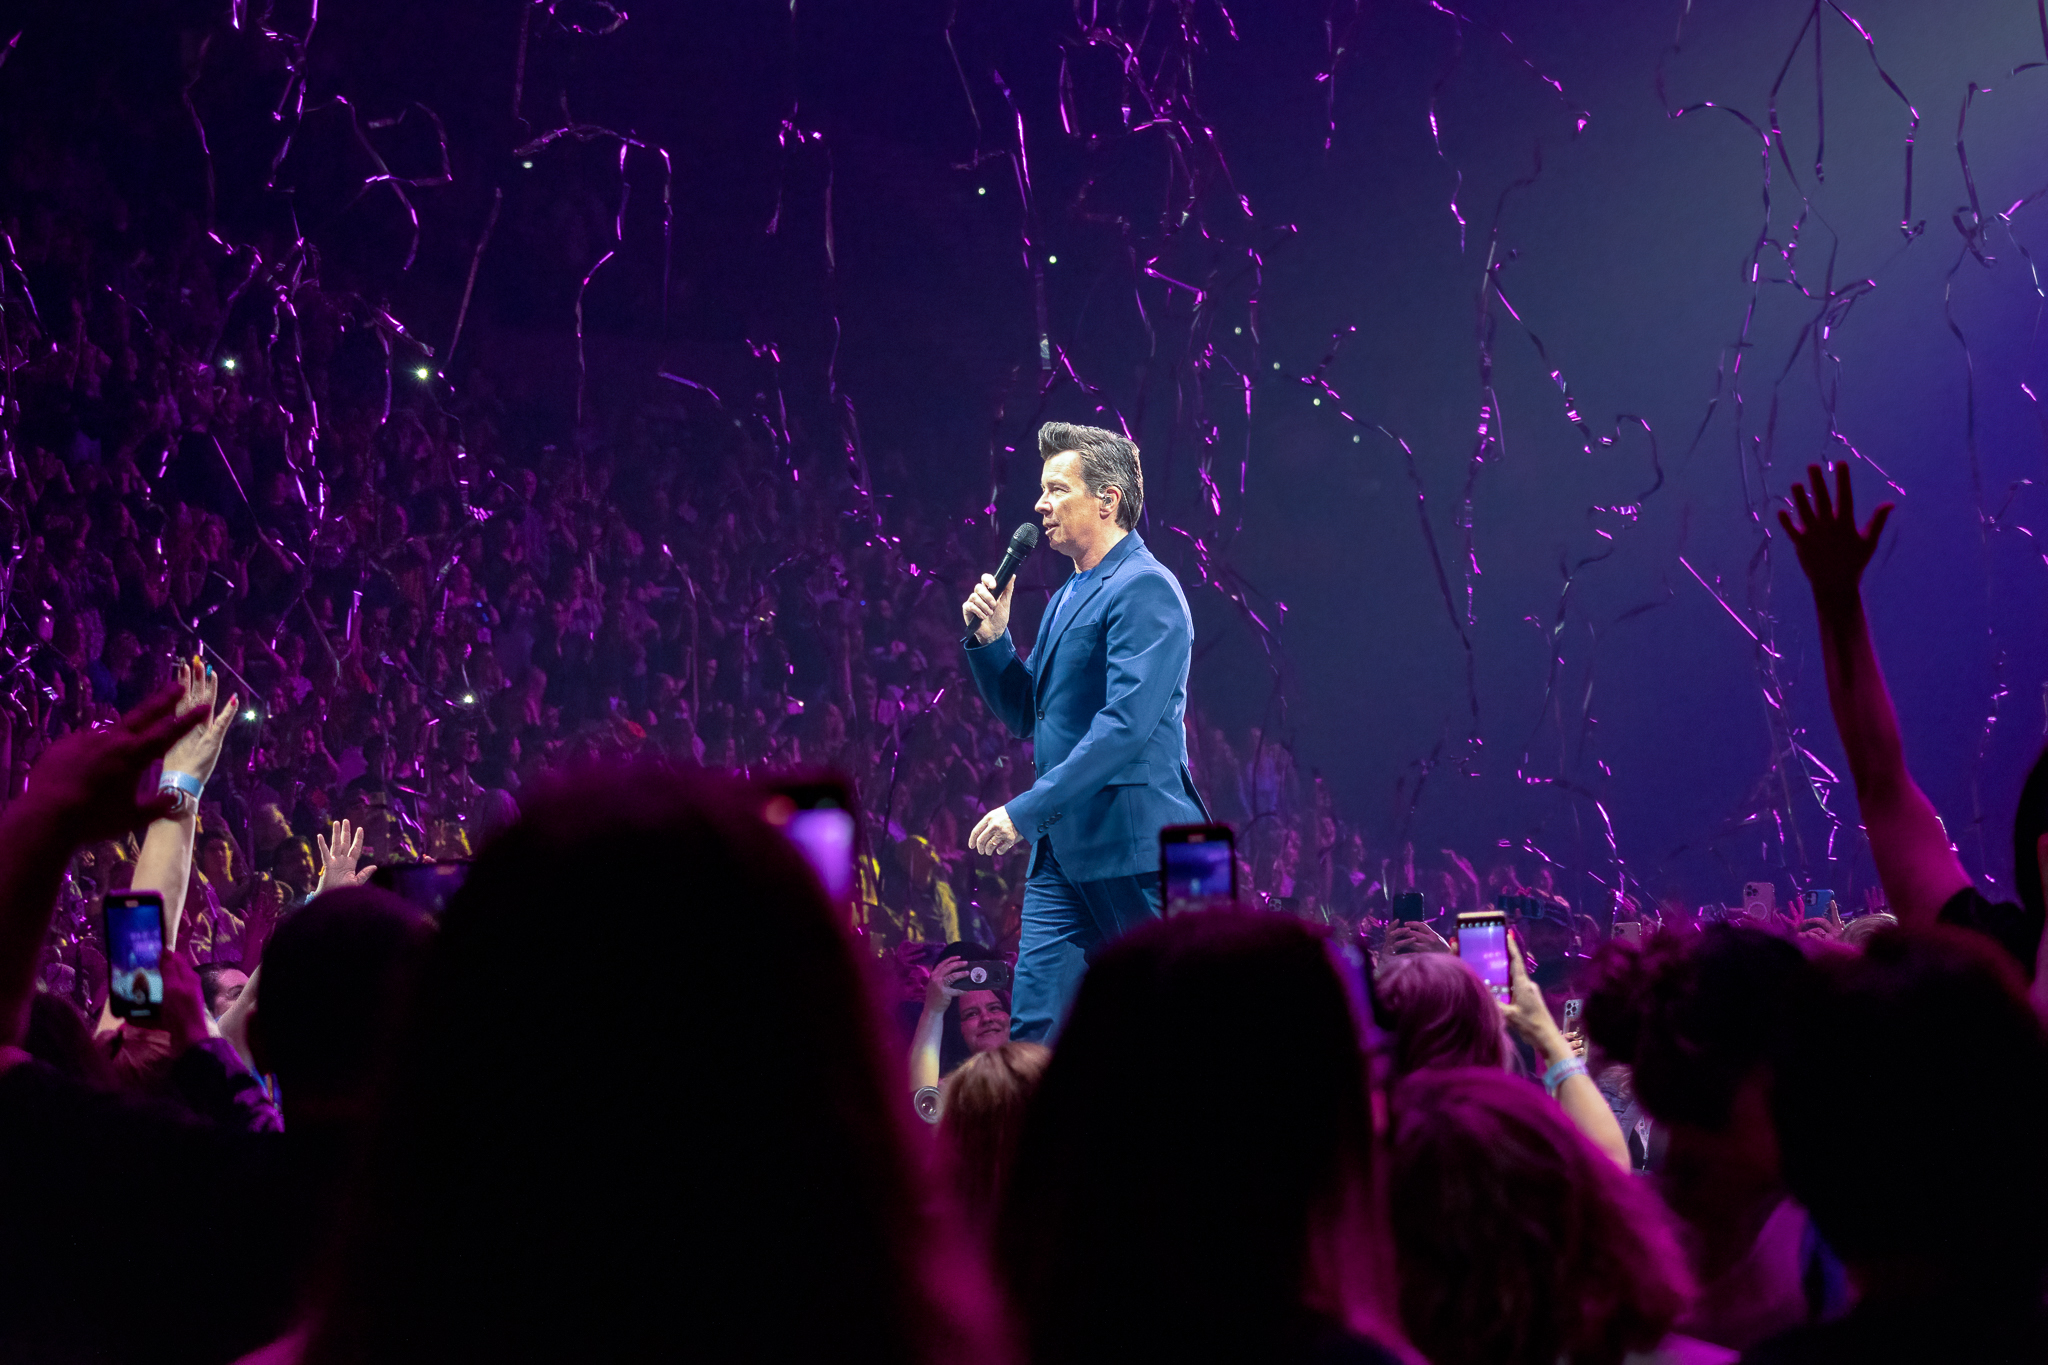 Rick Astley performs at Moda Center in Portland, OR on June 5, 2022.